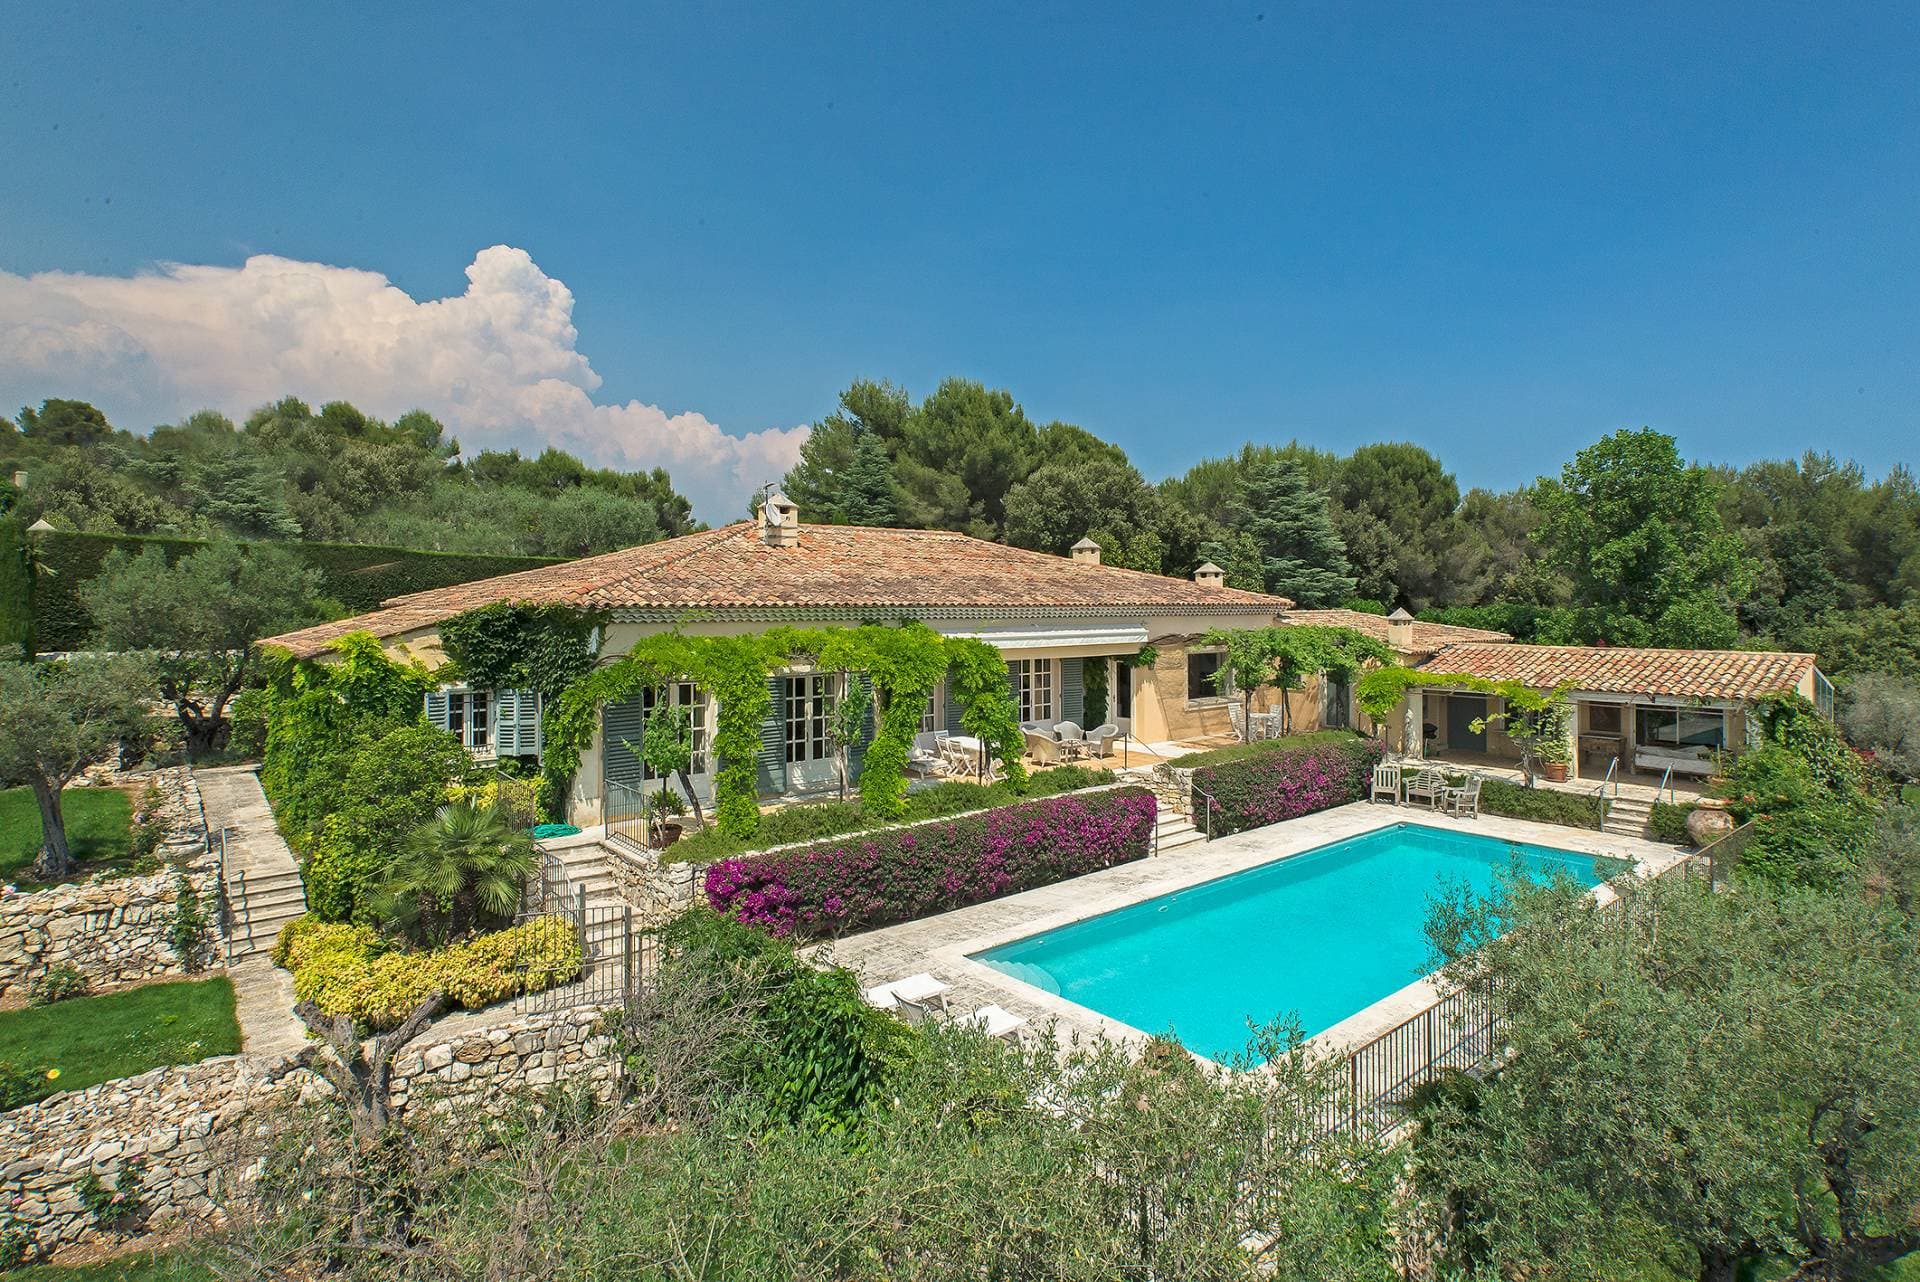 French holiday home - Is now a good time to buy? - Home Hunts